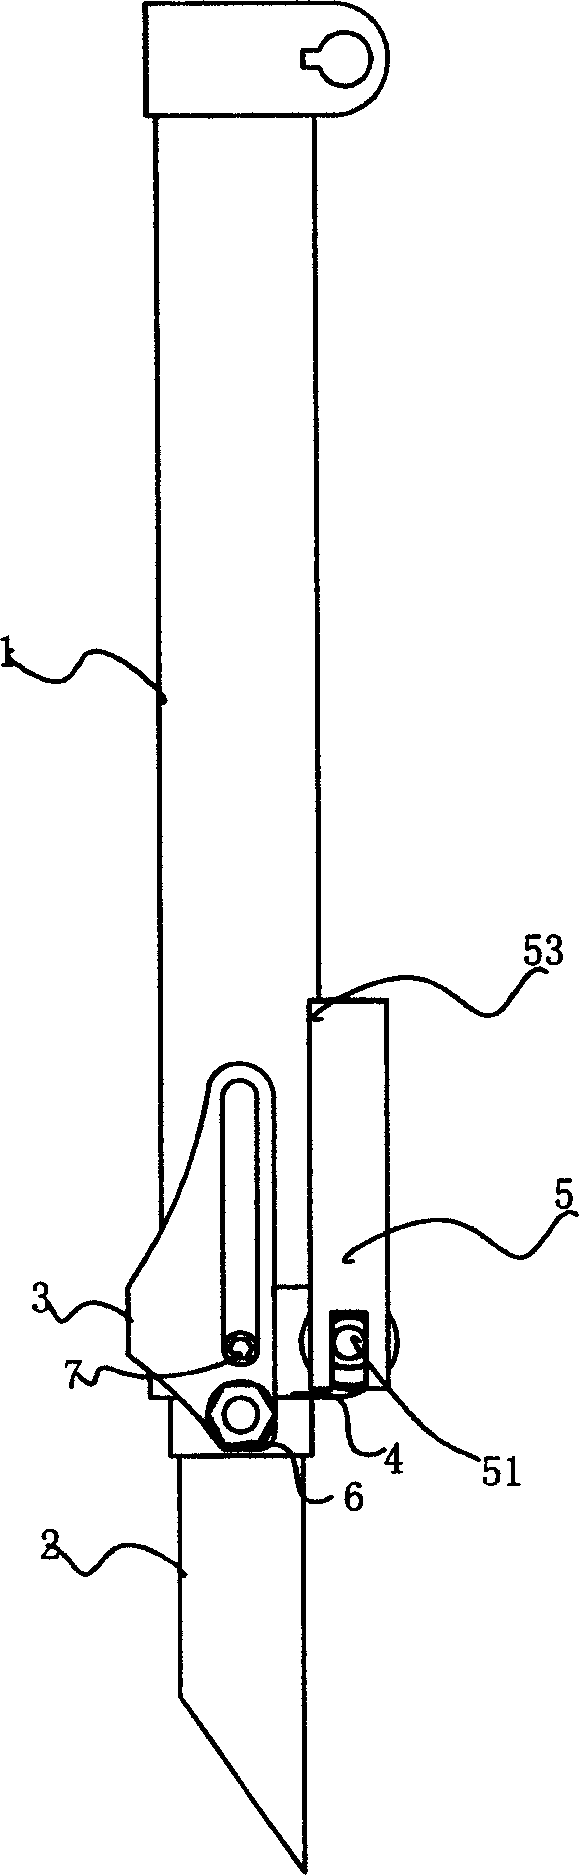 Structure for folding standpipe of bicycle